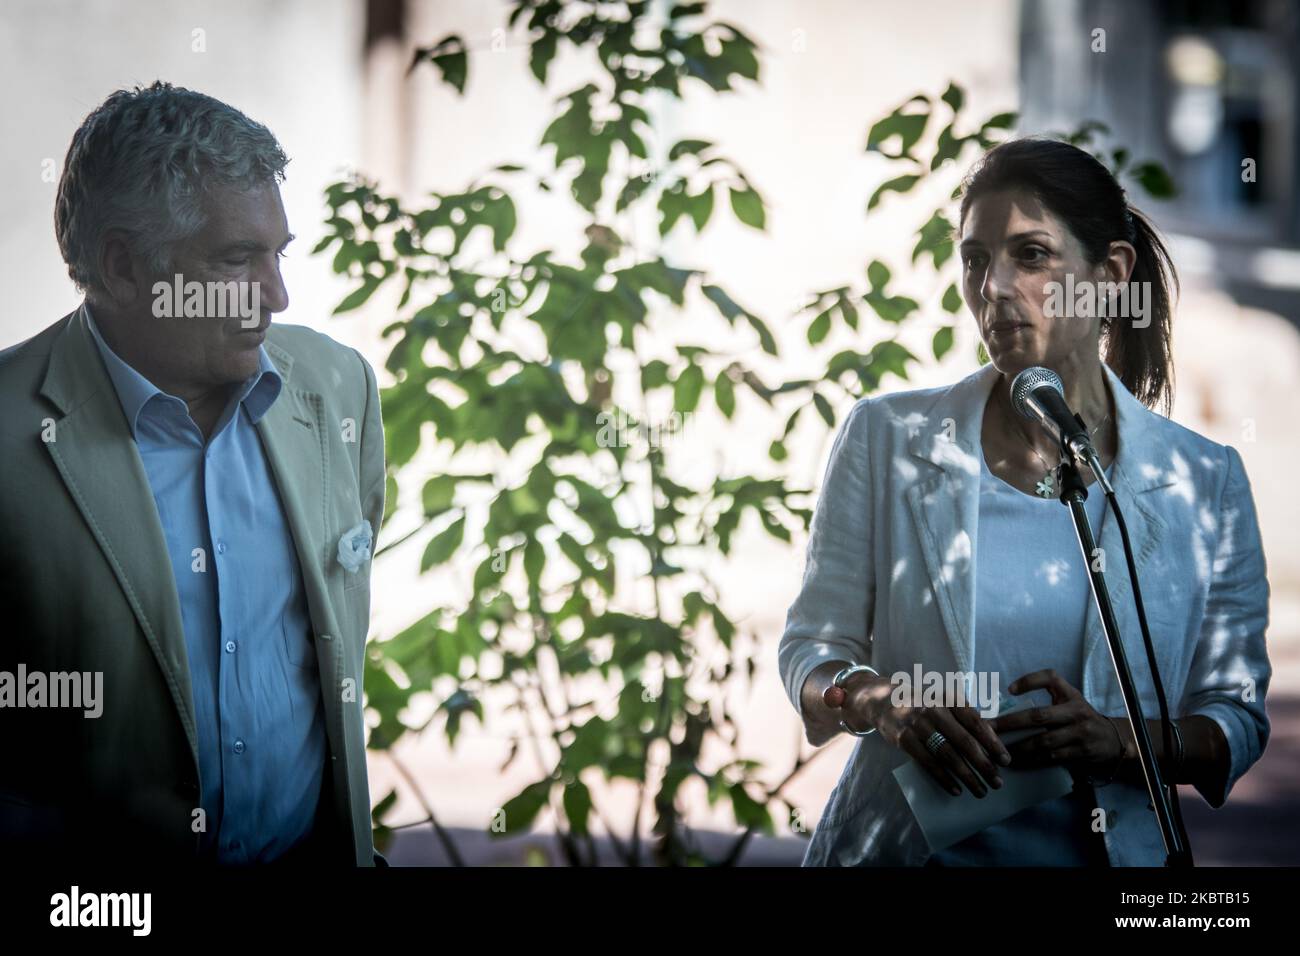 Francesco Petretti (L) president biopark of Rome and the Mayor of Rome Virginia Raggi speak at the press meeting to present the birth of two Asian lions at the Bioparco in Rome, Italy on July 10, 2020. (Photo by Andrea Ronchini/NurPhoto) Stock Photo